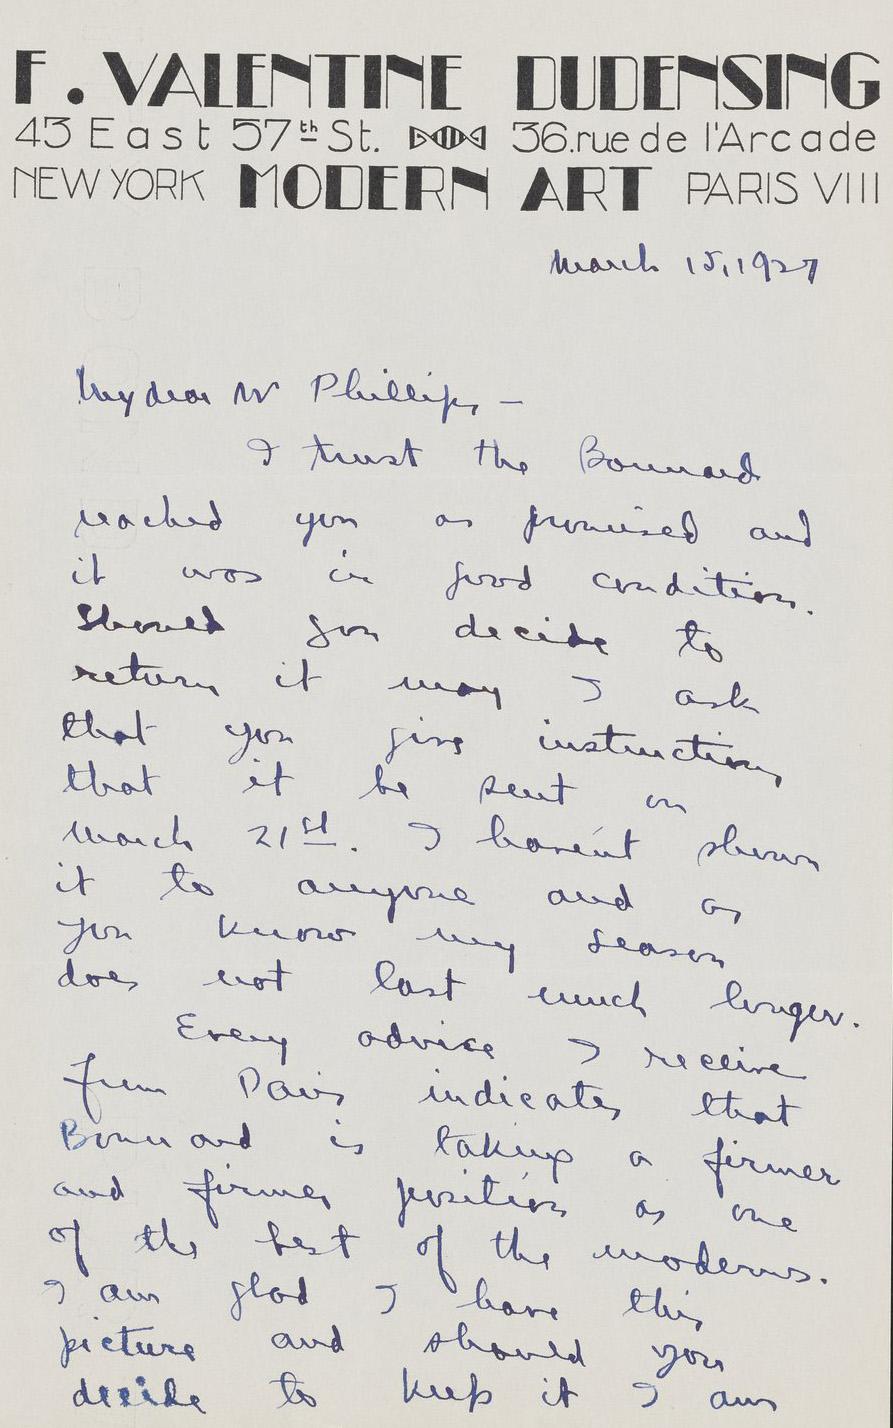 Letter from F. Valentine Dudensing to Duncan Phillips, March 15, 1927